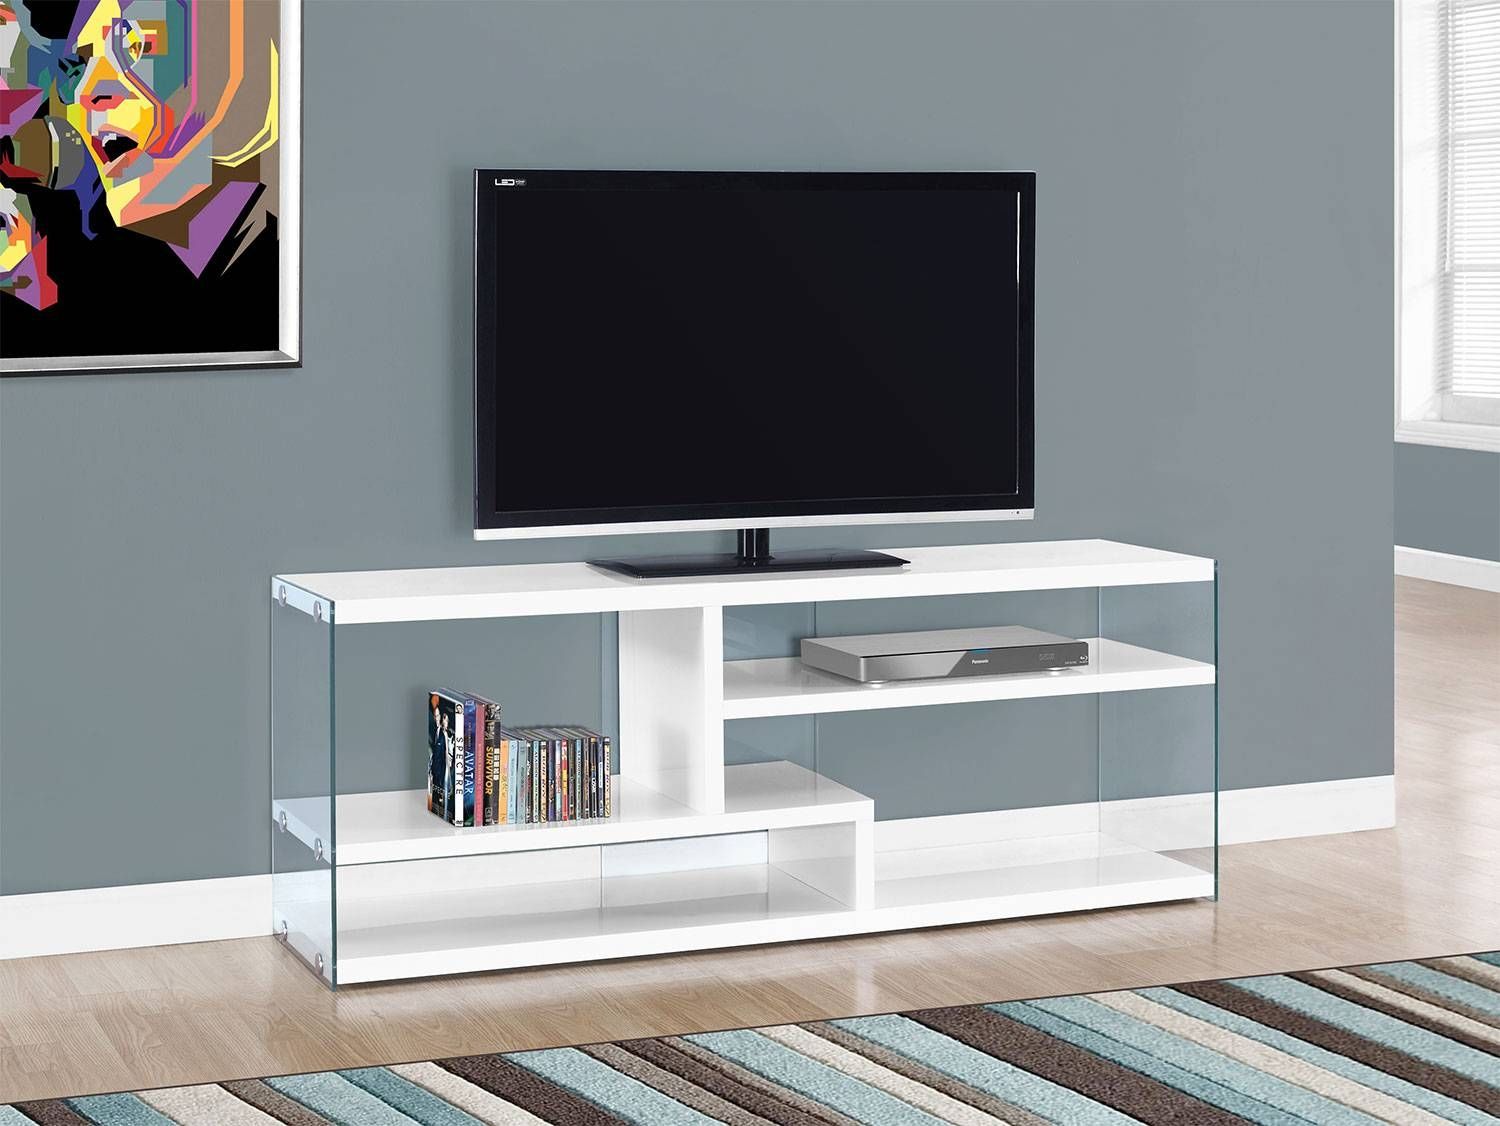 Zara Tv Stand – White | Leon's Throughout Modern Glass Tv Stands (View 11 of 15)